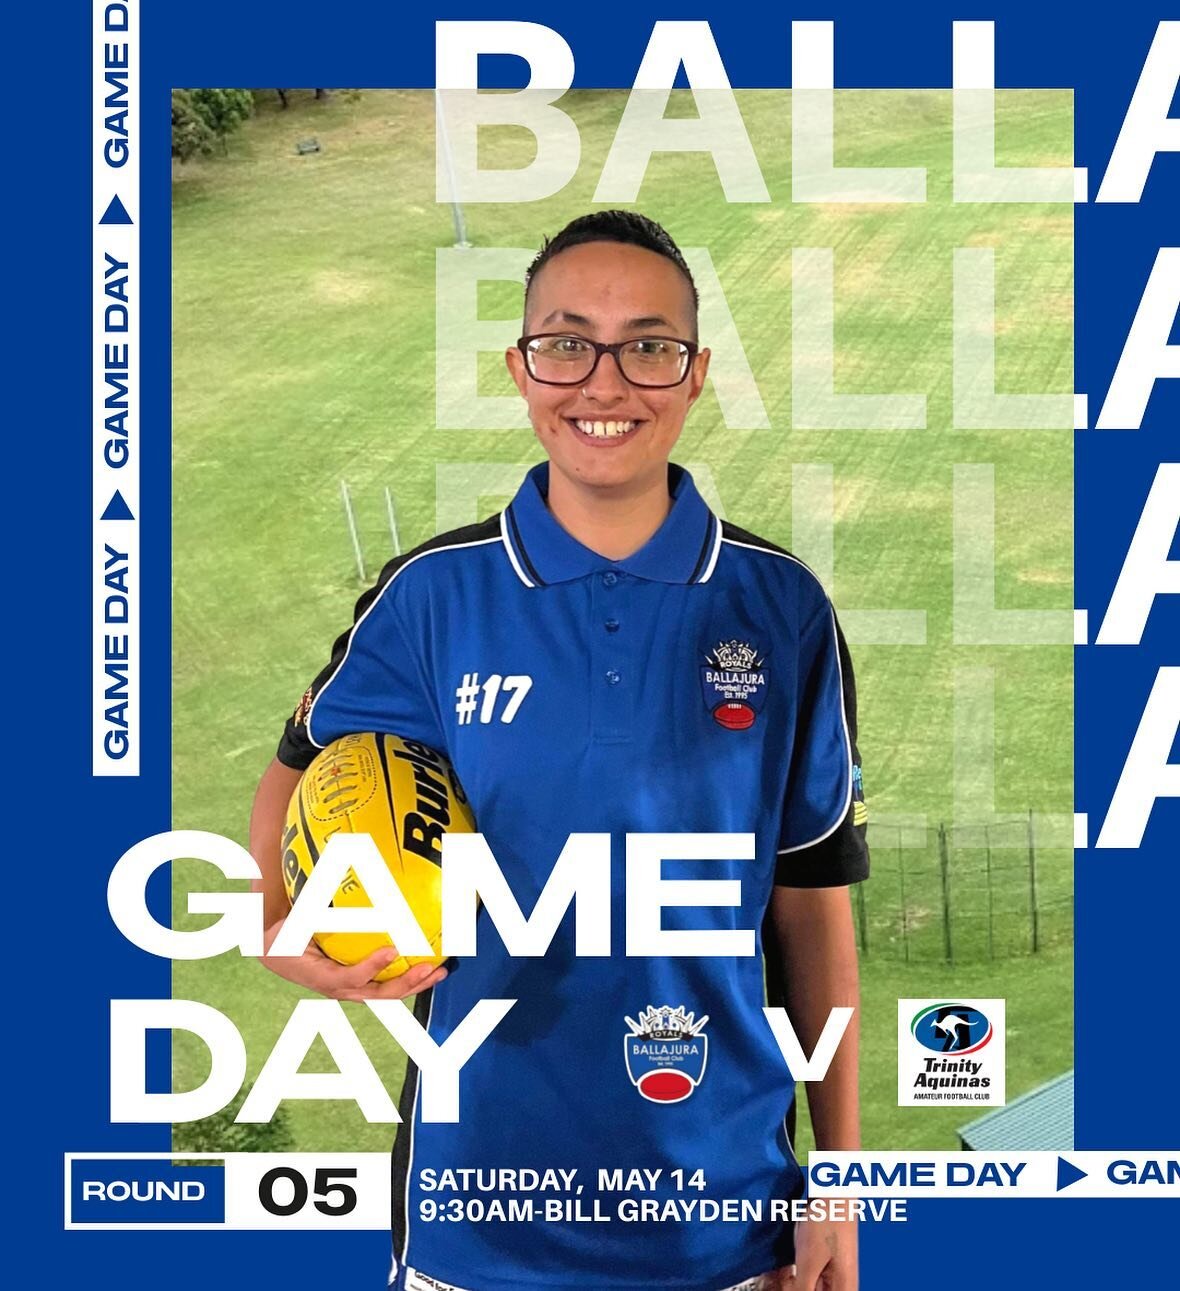 *ATTENTION*

When: Saturday 14th May (tomorrow) 9:30am bounce down!!
Where: Bill Grayden Reserve
Who: Balla vs Trinity 
Why: Support our Womens team💙🖤